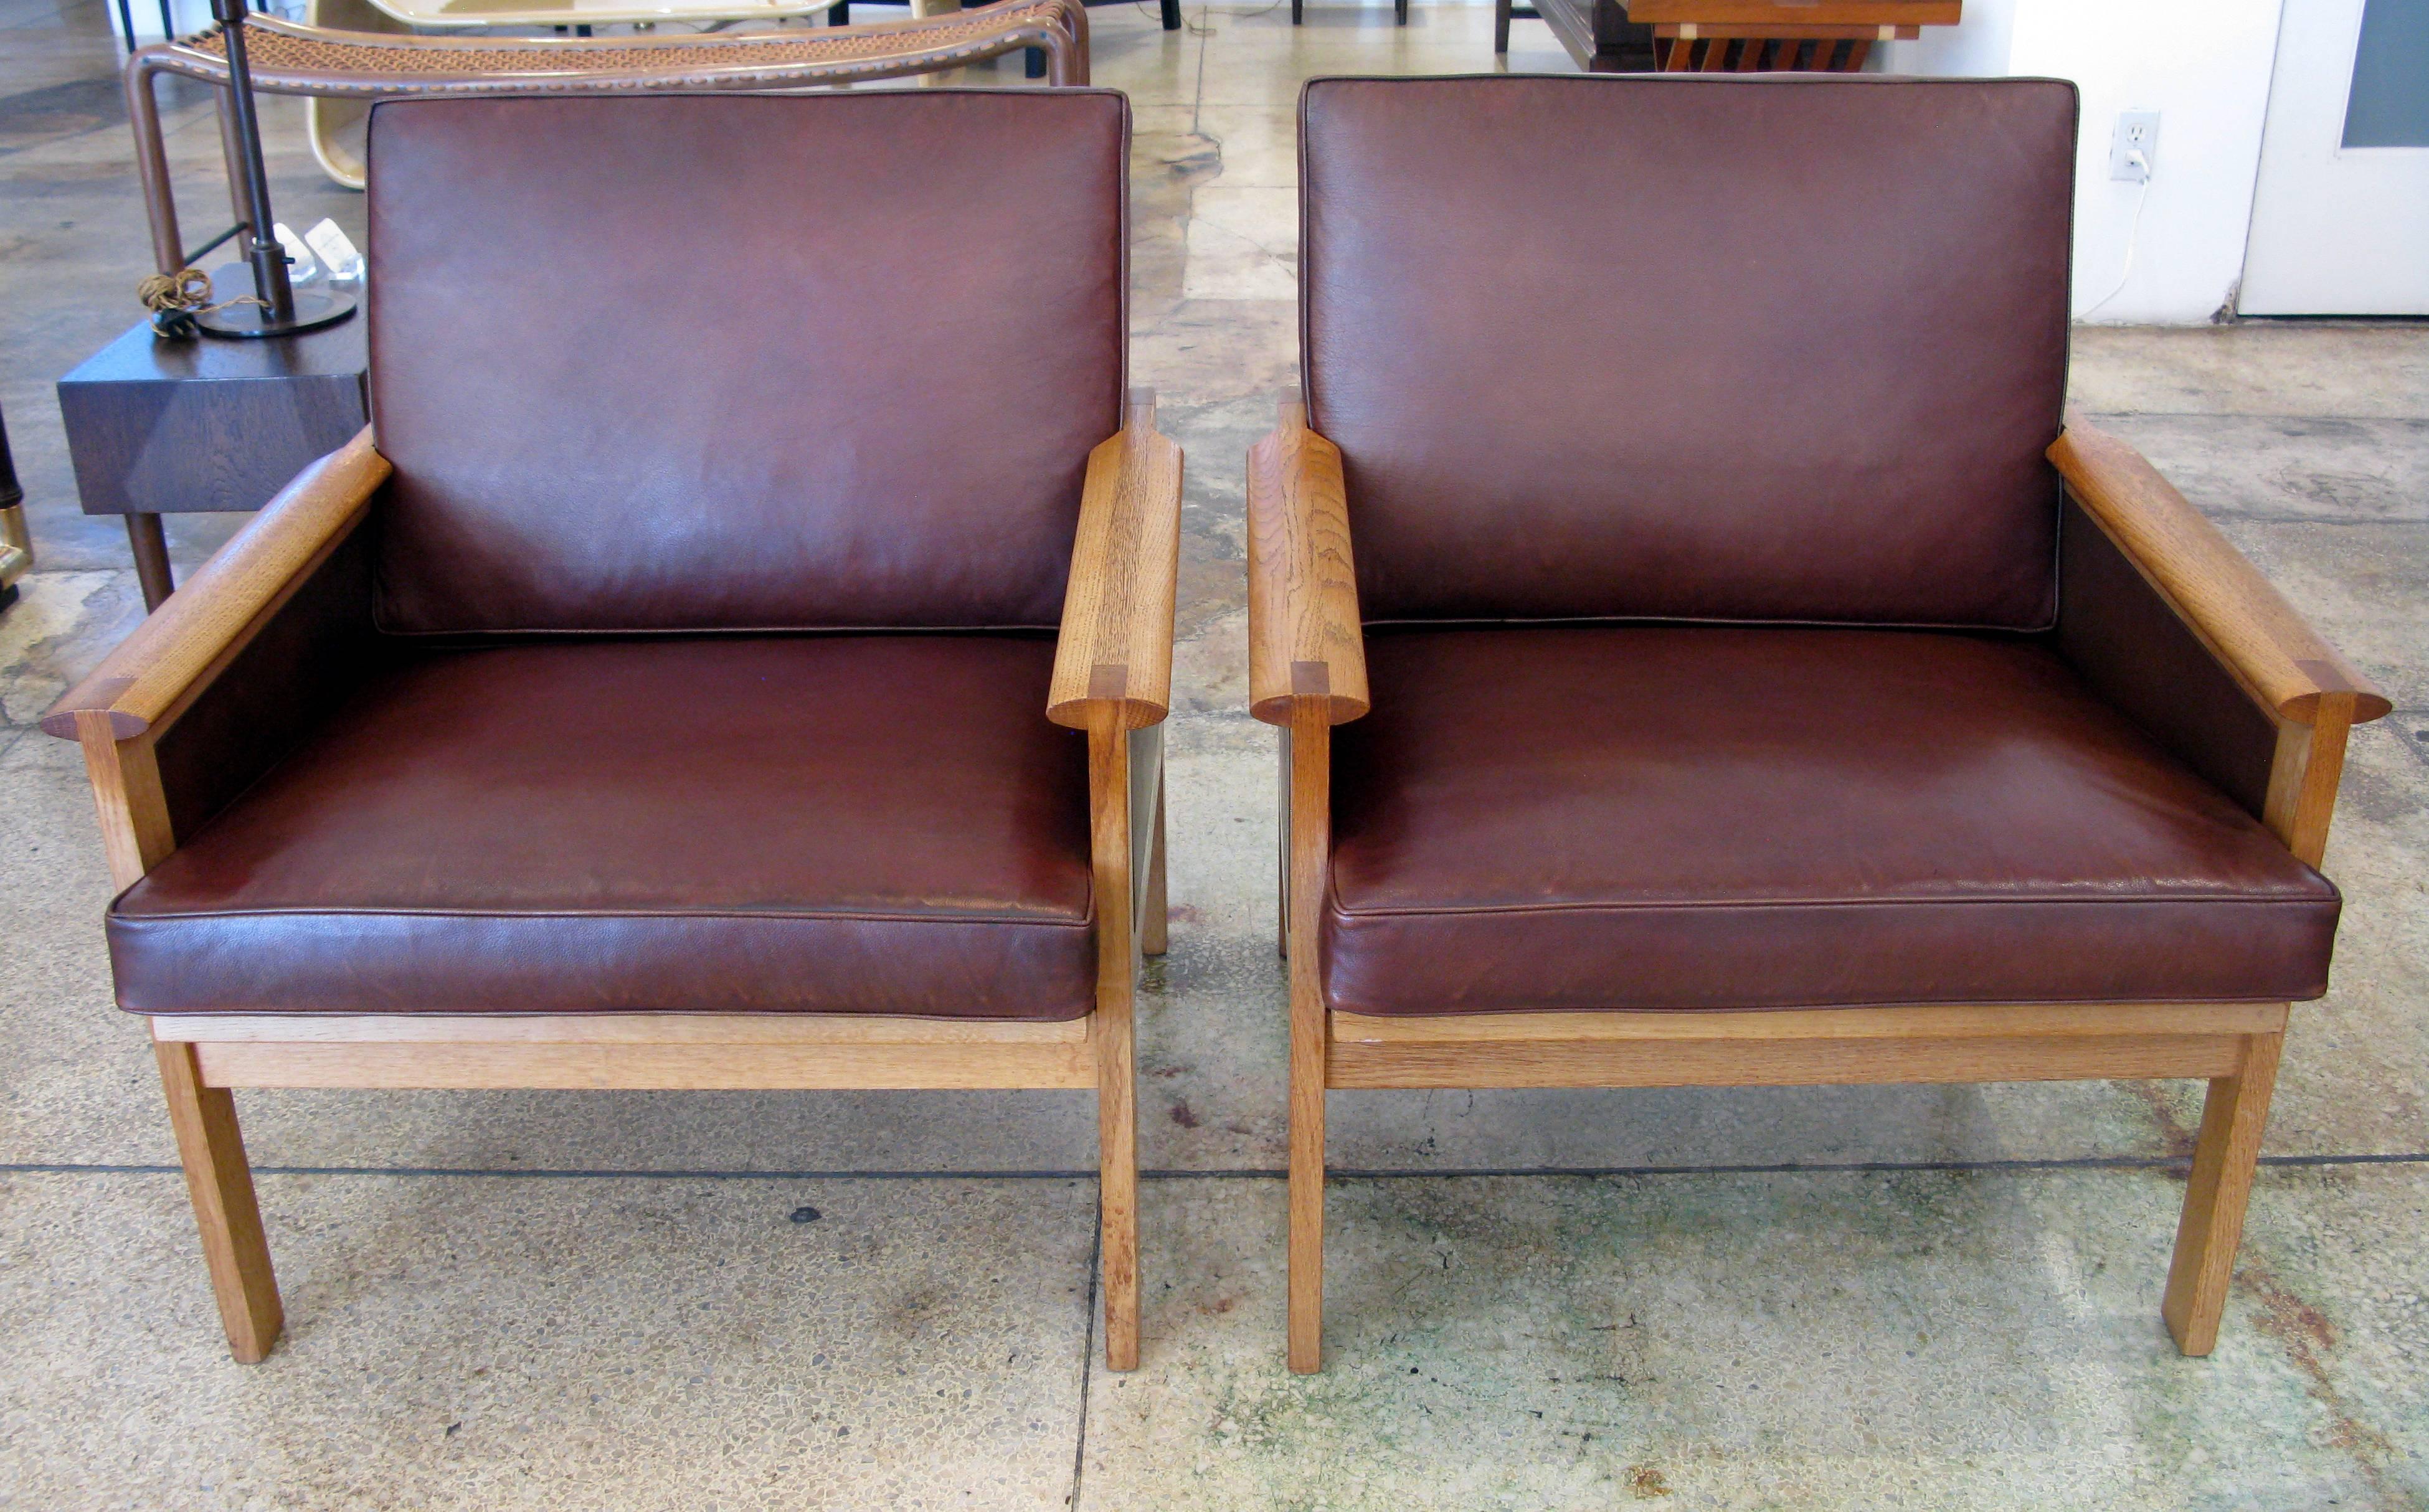 Pair of rare leather and oak lounge chairs designed by Illum Wikkelsø for N. Eilersen, Denmark. Chocolate brown leather cushions and side panels with a subtle reddish undertone. Seat height: 16